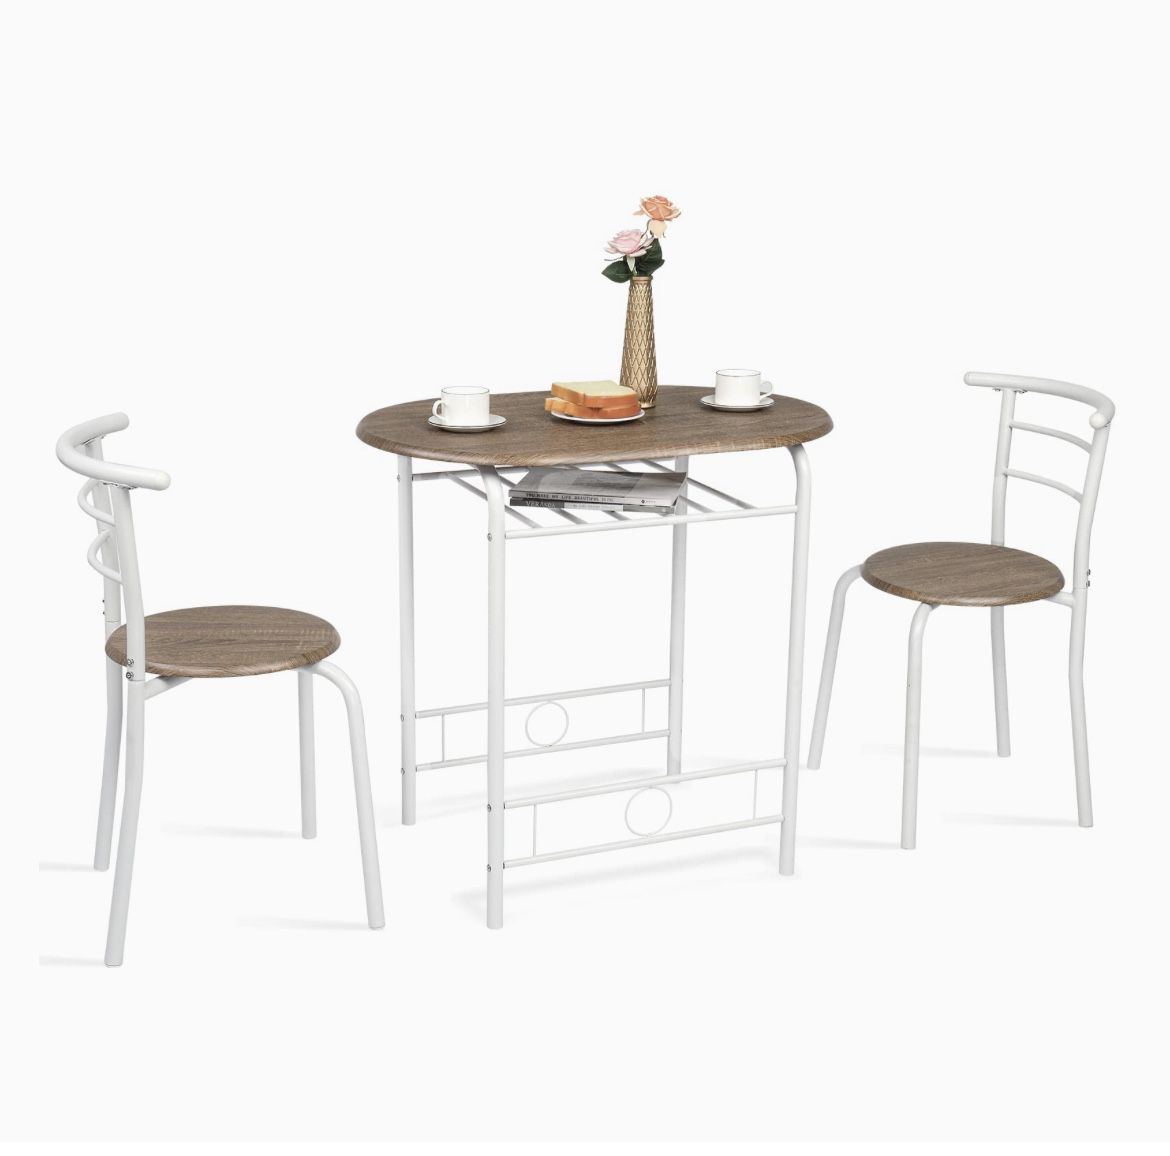 3 Piece Dining Set, Breakfast Table Set For 2, Wooden Table And 2 Chairs